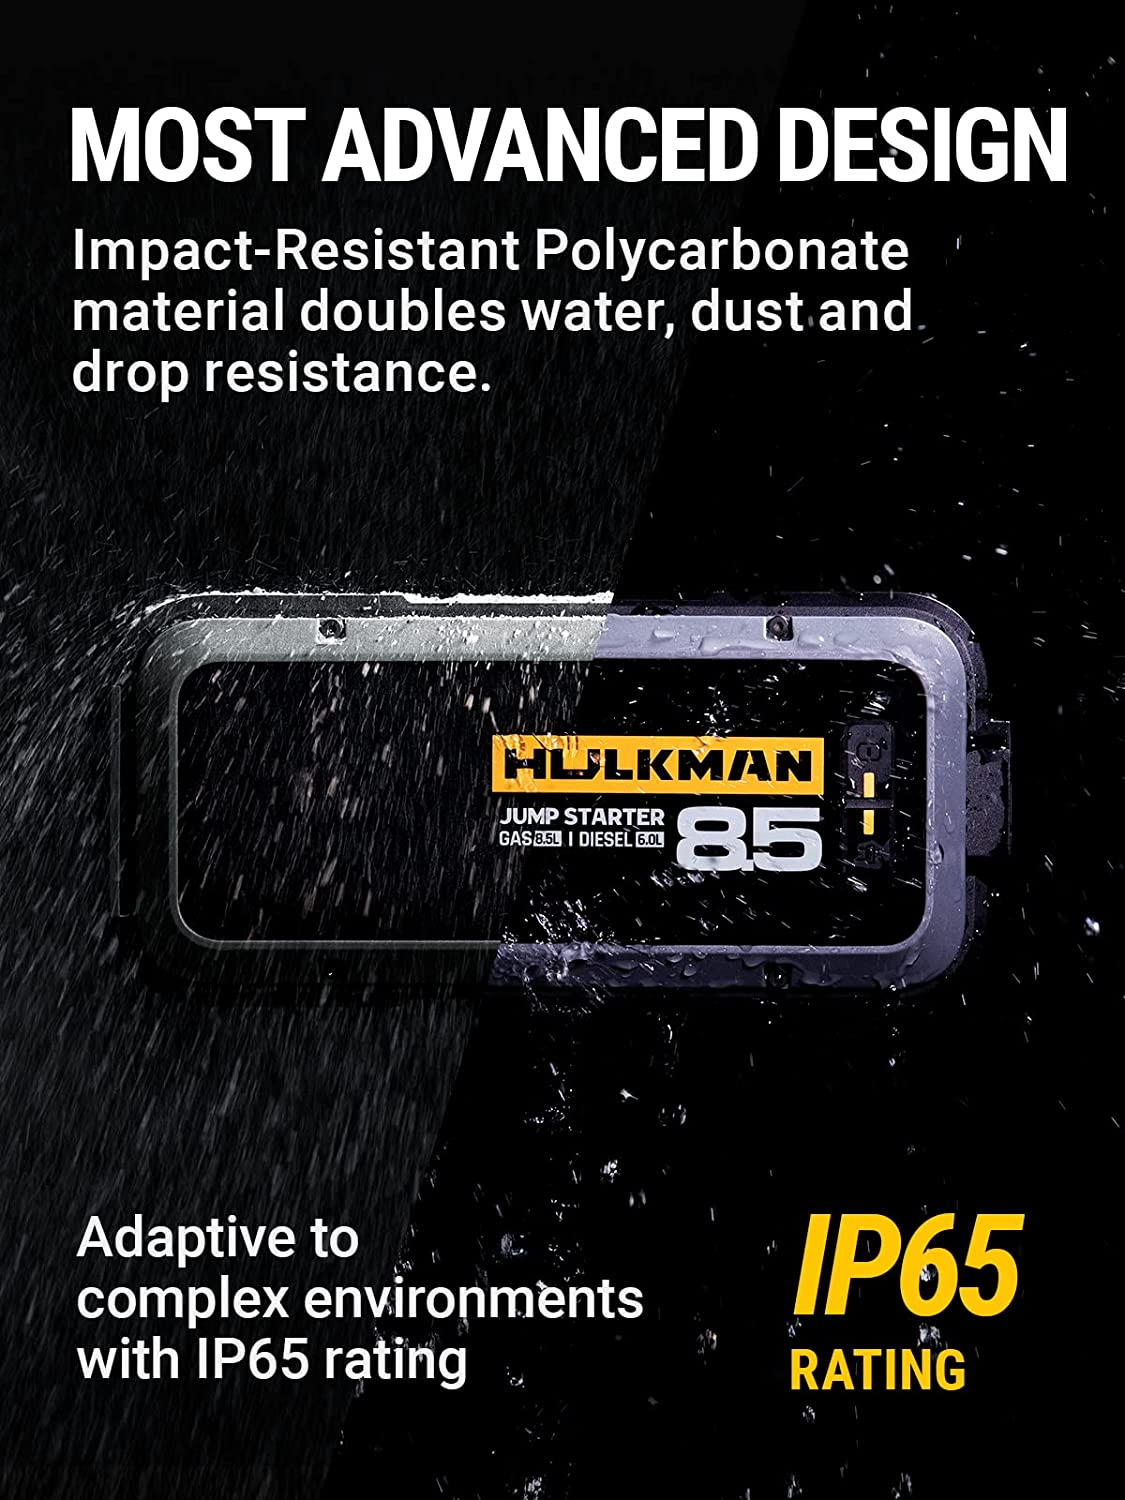 https://bigbigmart.com/wp-content/uploads/2023/06/HULKMAN-Alpha85-Smart-Jump-Starter-2000-Amp-20000mAh-Car-Starter-for-up-to-8.5L-Gas-and-6L-Diesel-Engines-with-Boost-Function-for-Totally-Dead-Battery-12V-Lithium-Portable-Car-Battery-Booster-Pack5.jpg